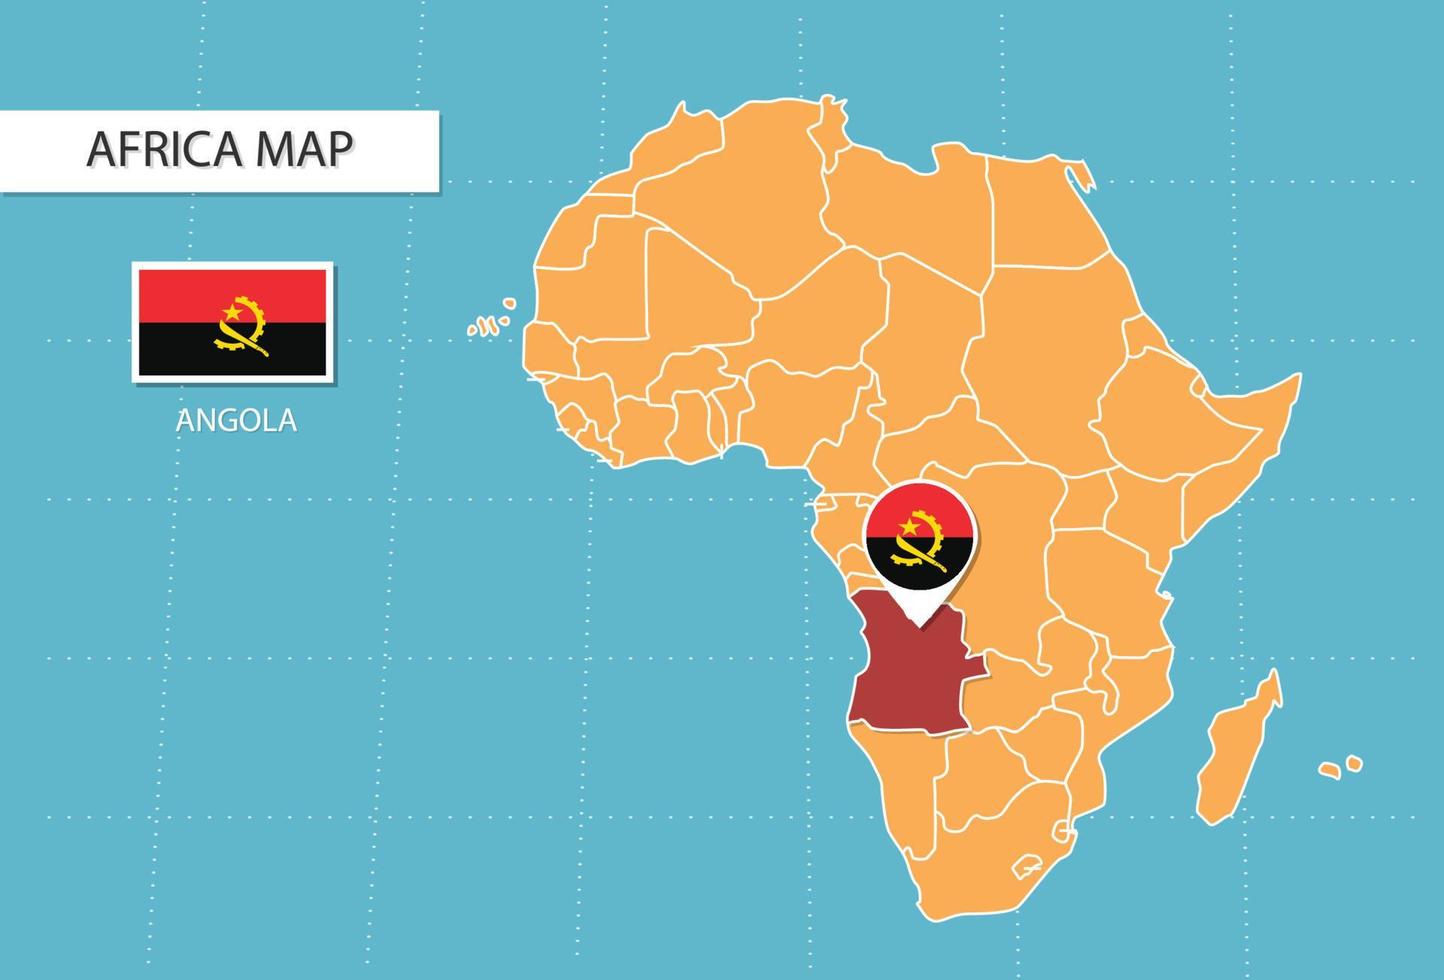 Angola map in Africa, icons showing Angola location and flags. vector